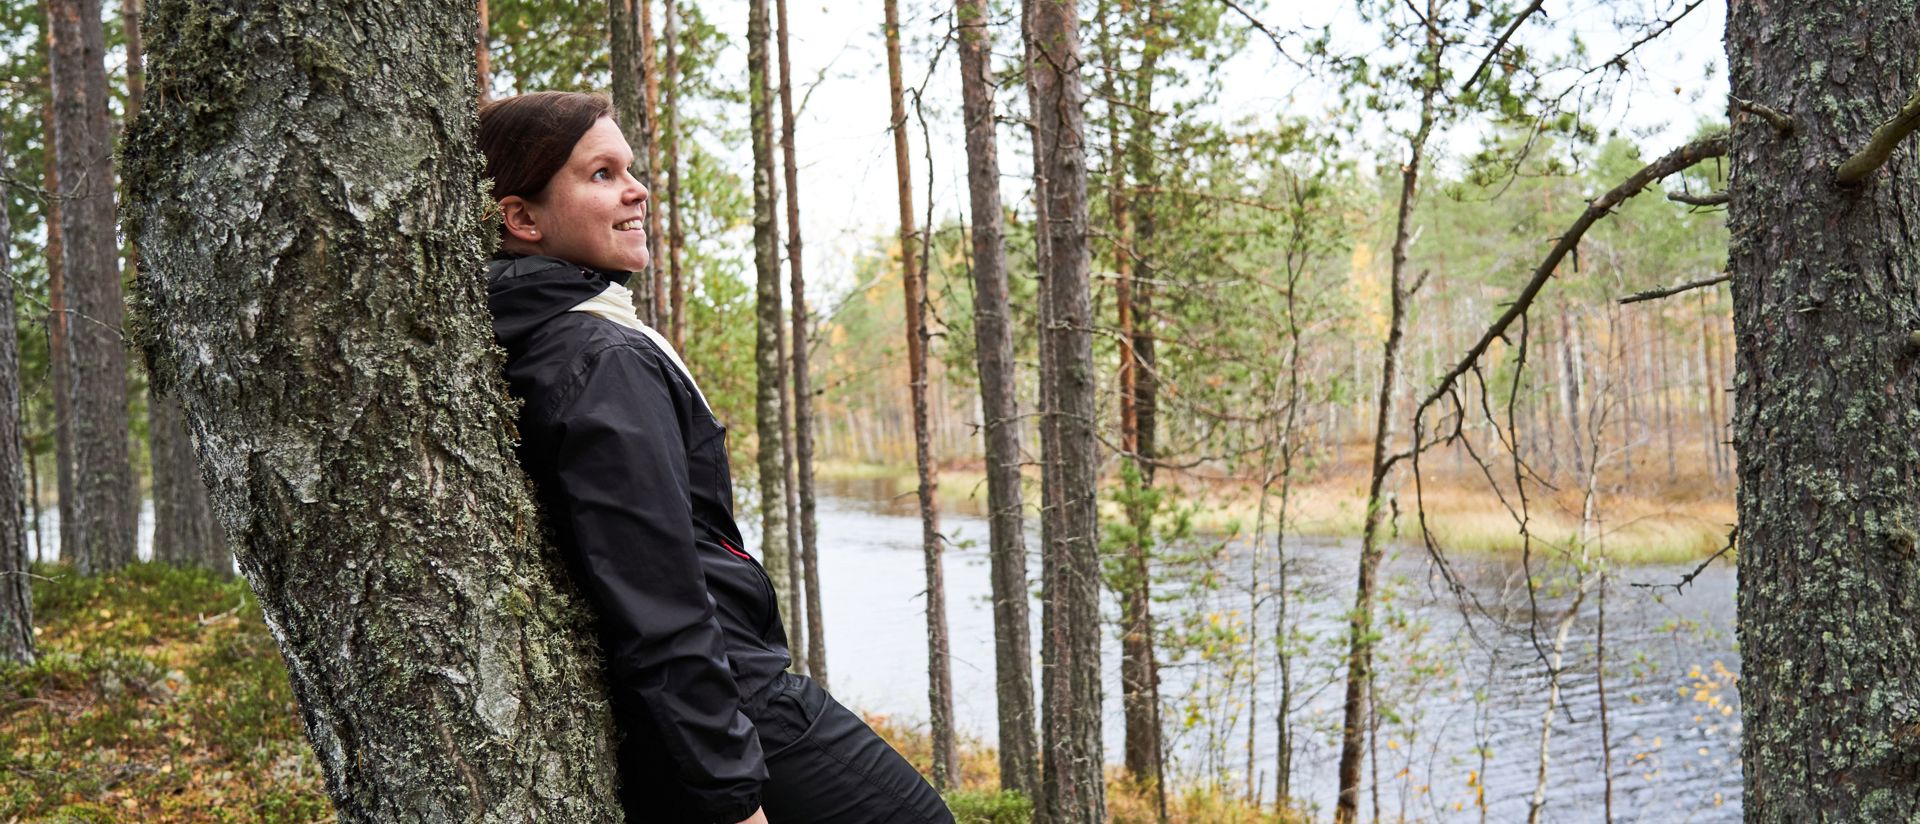 a hiker leaning against a tree, forest and lake in the background